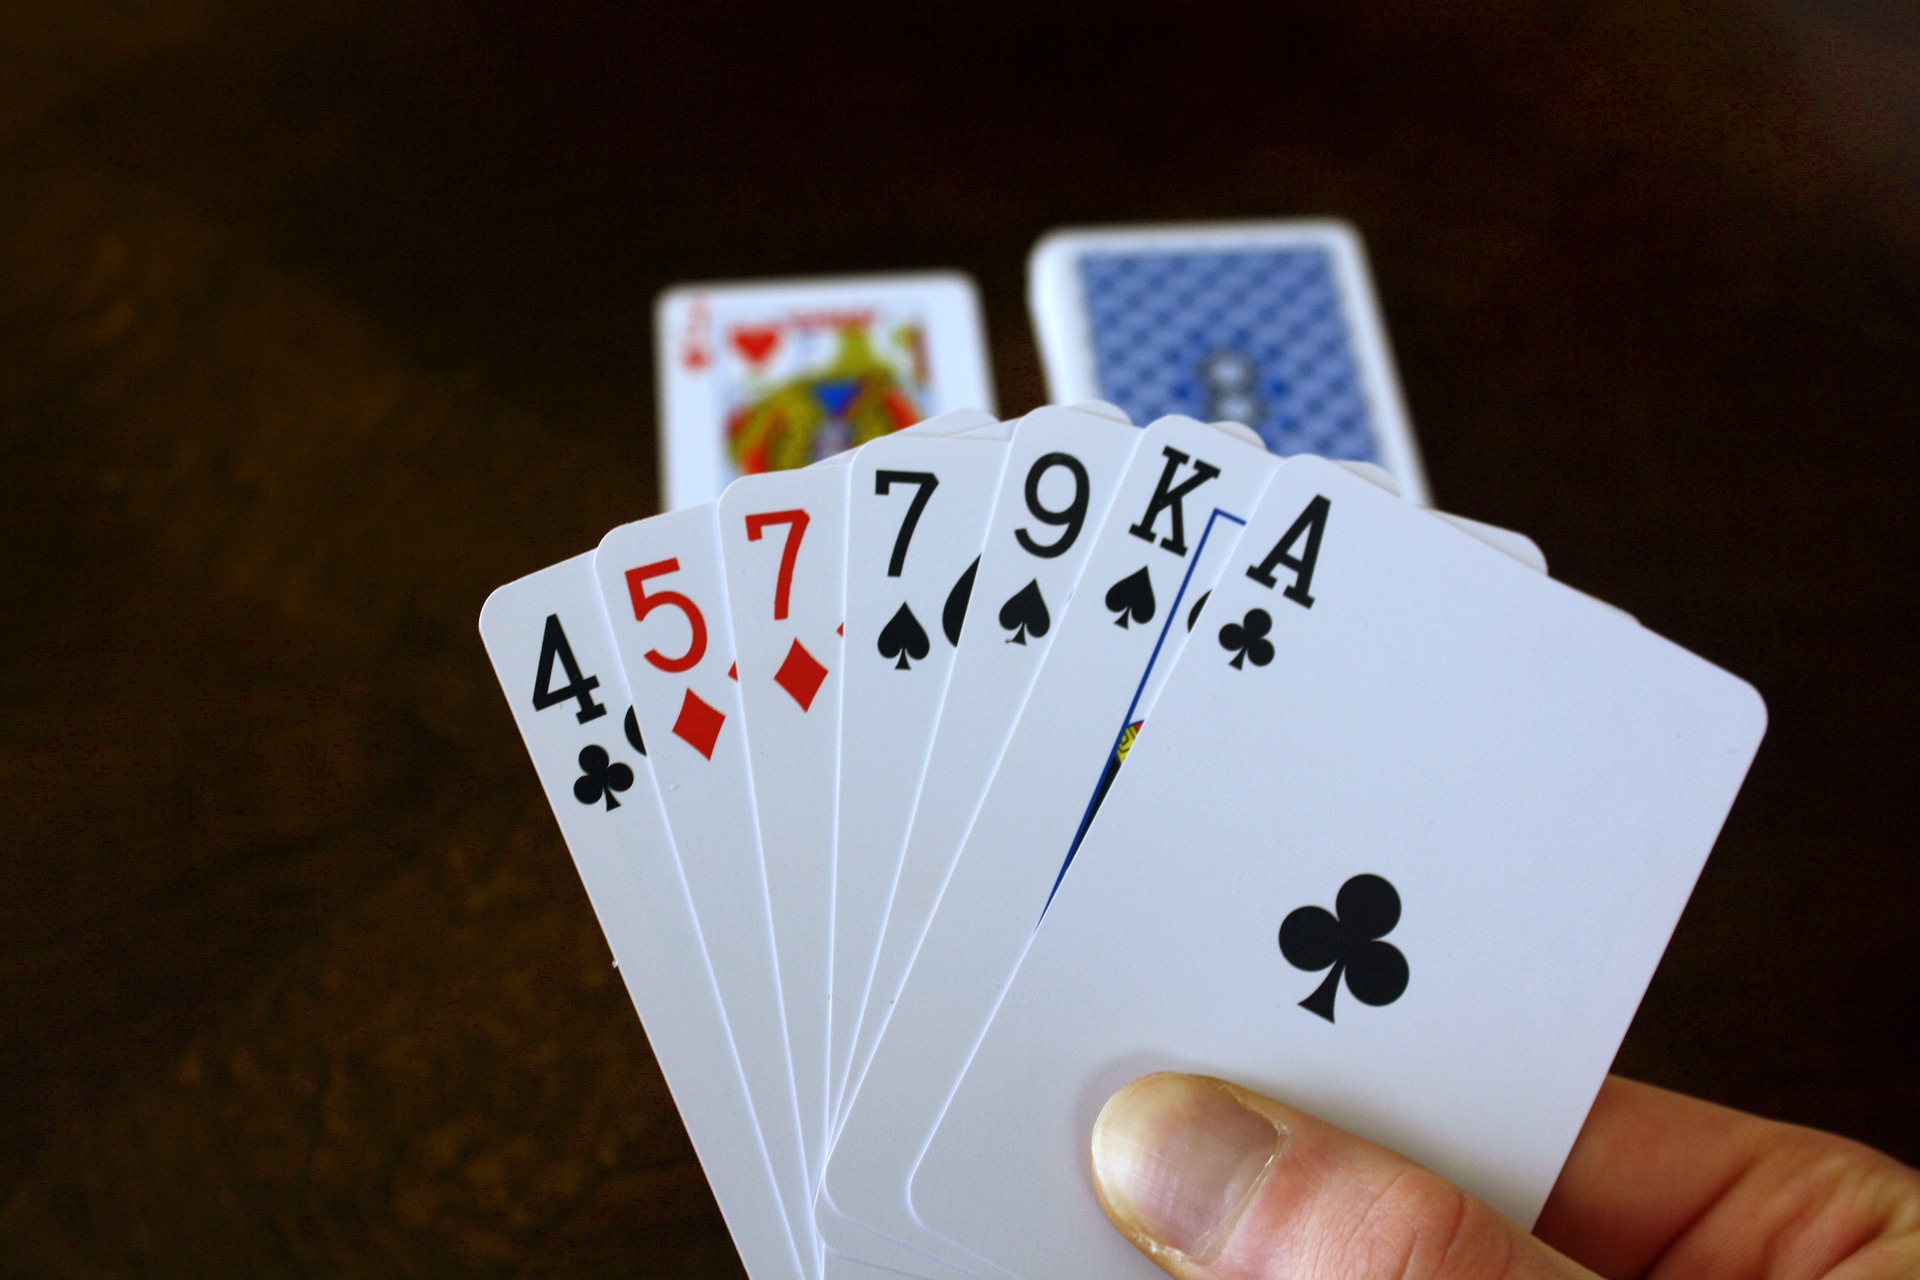 How To Play Rummy With friends Online?